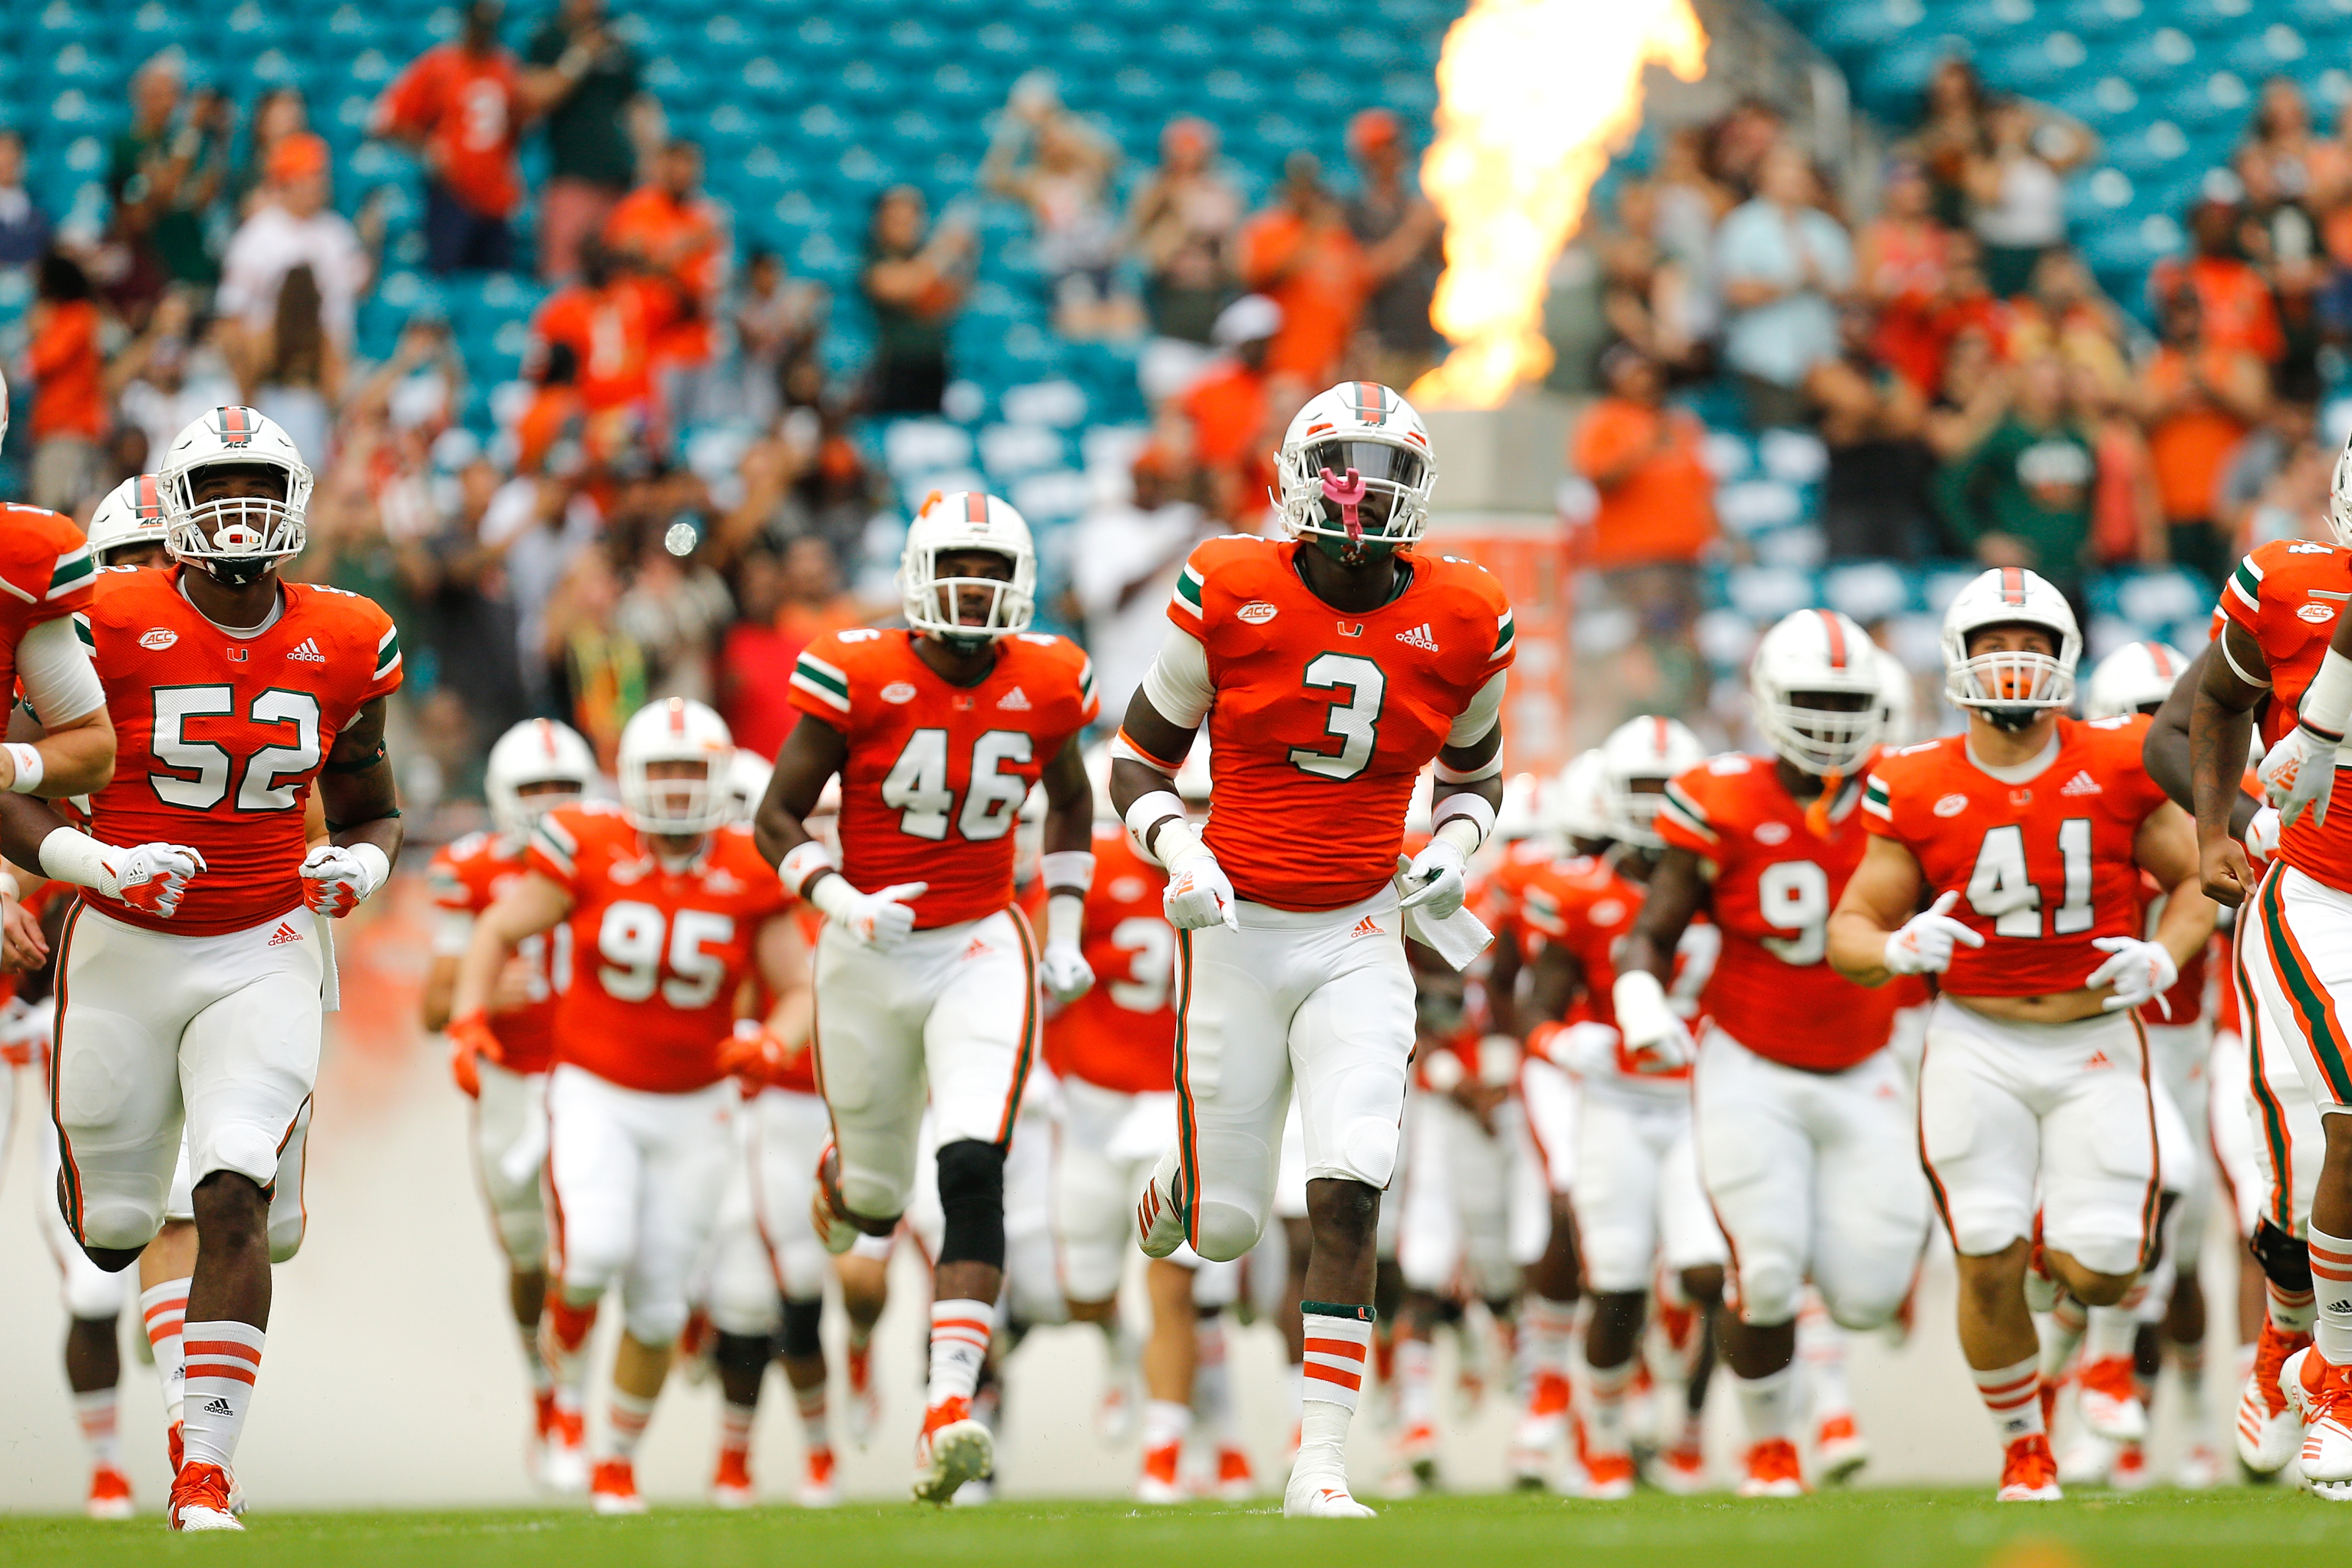 GO 'CANES! on X: The University of Miami is the only school in